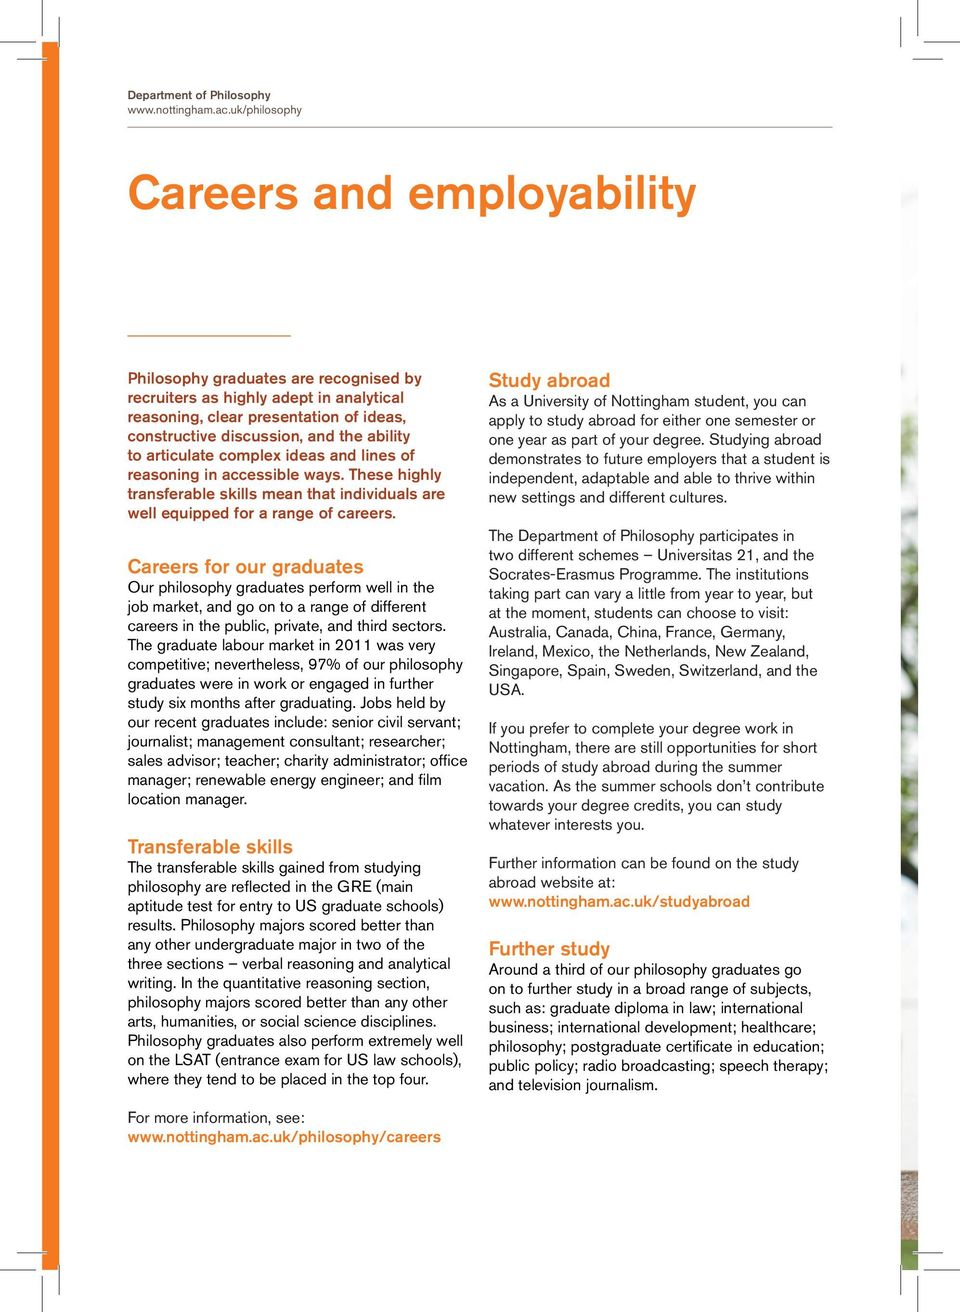 Careers for our graduates Our philosophy graduates perform well in the job market, and go on to a range of different careers in the public, private, and third sectors.